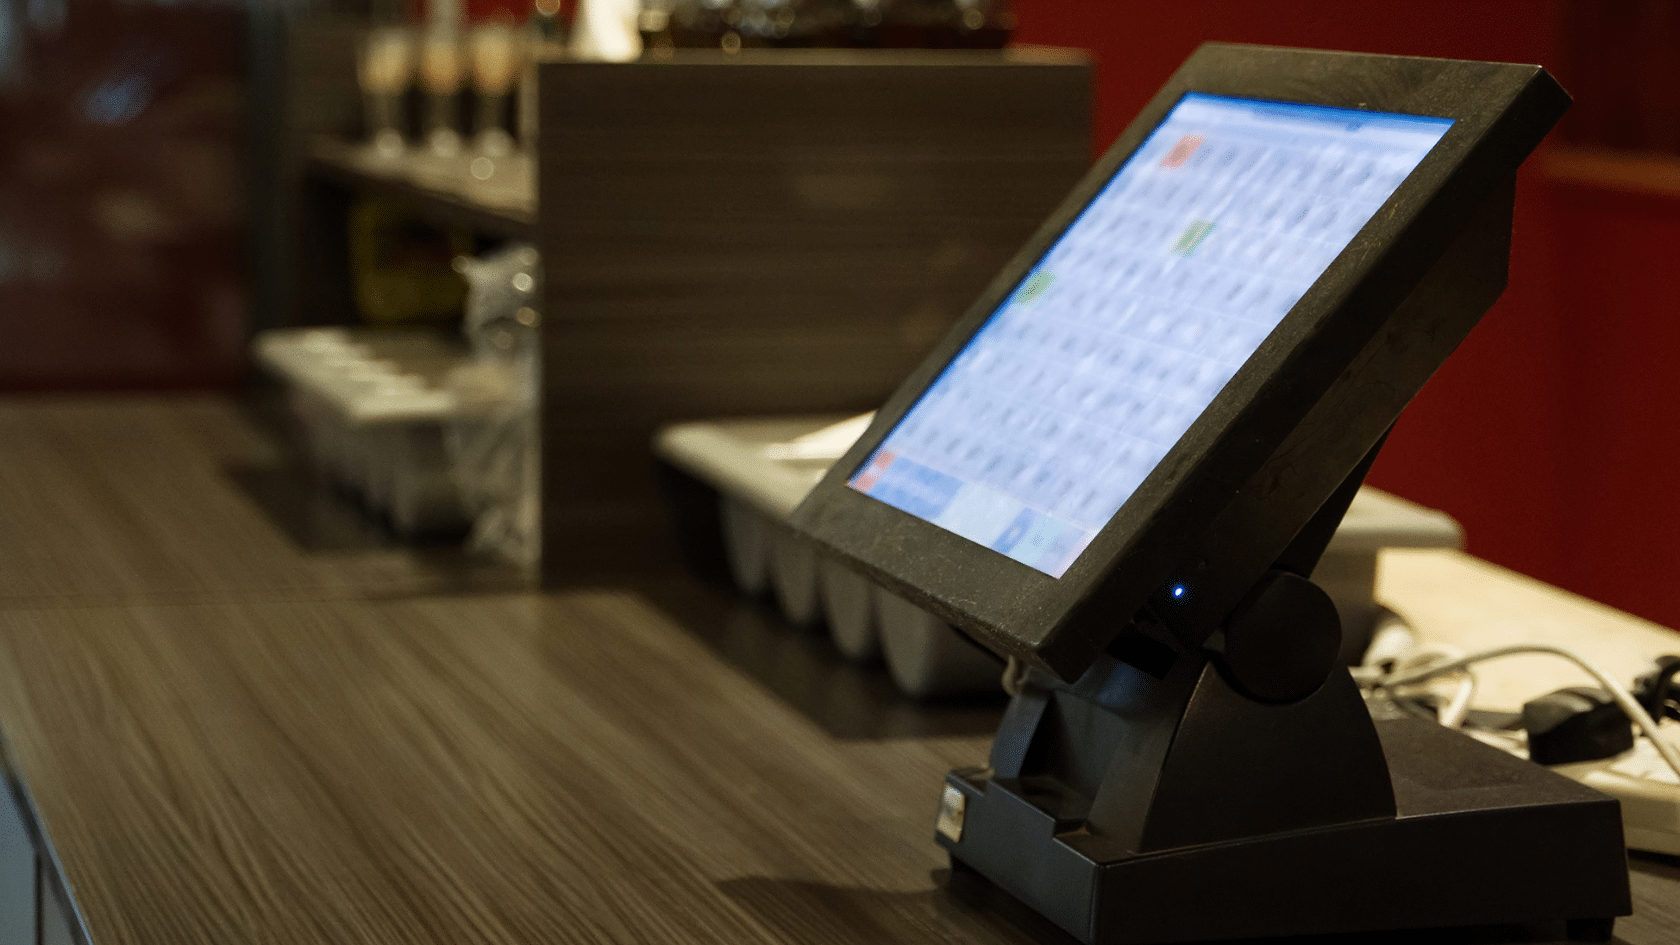 POS System (https://www.oracle.com/sg/industries/food-beverage/restaurant-pos-systems/)